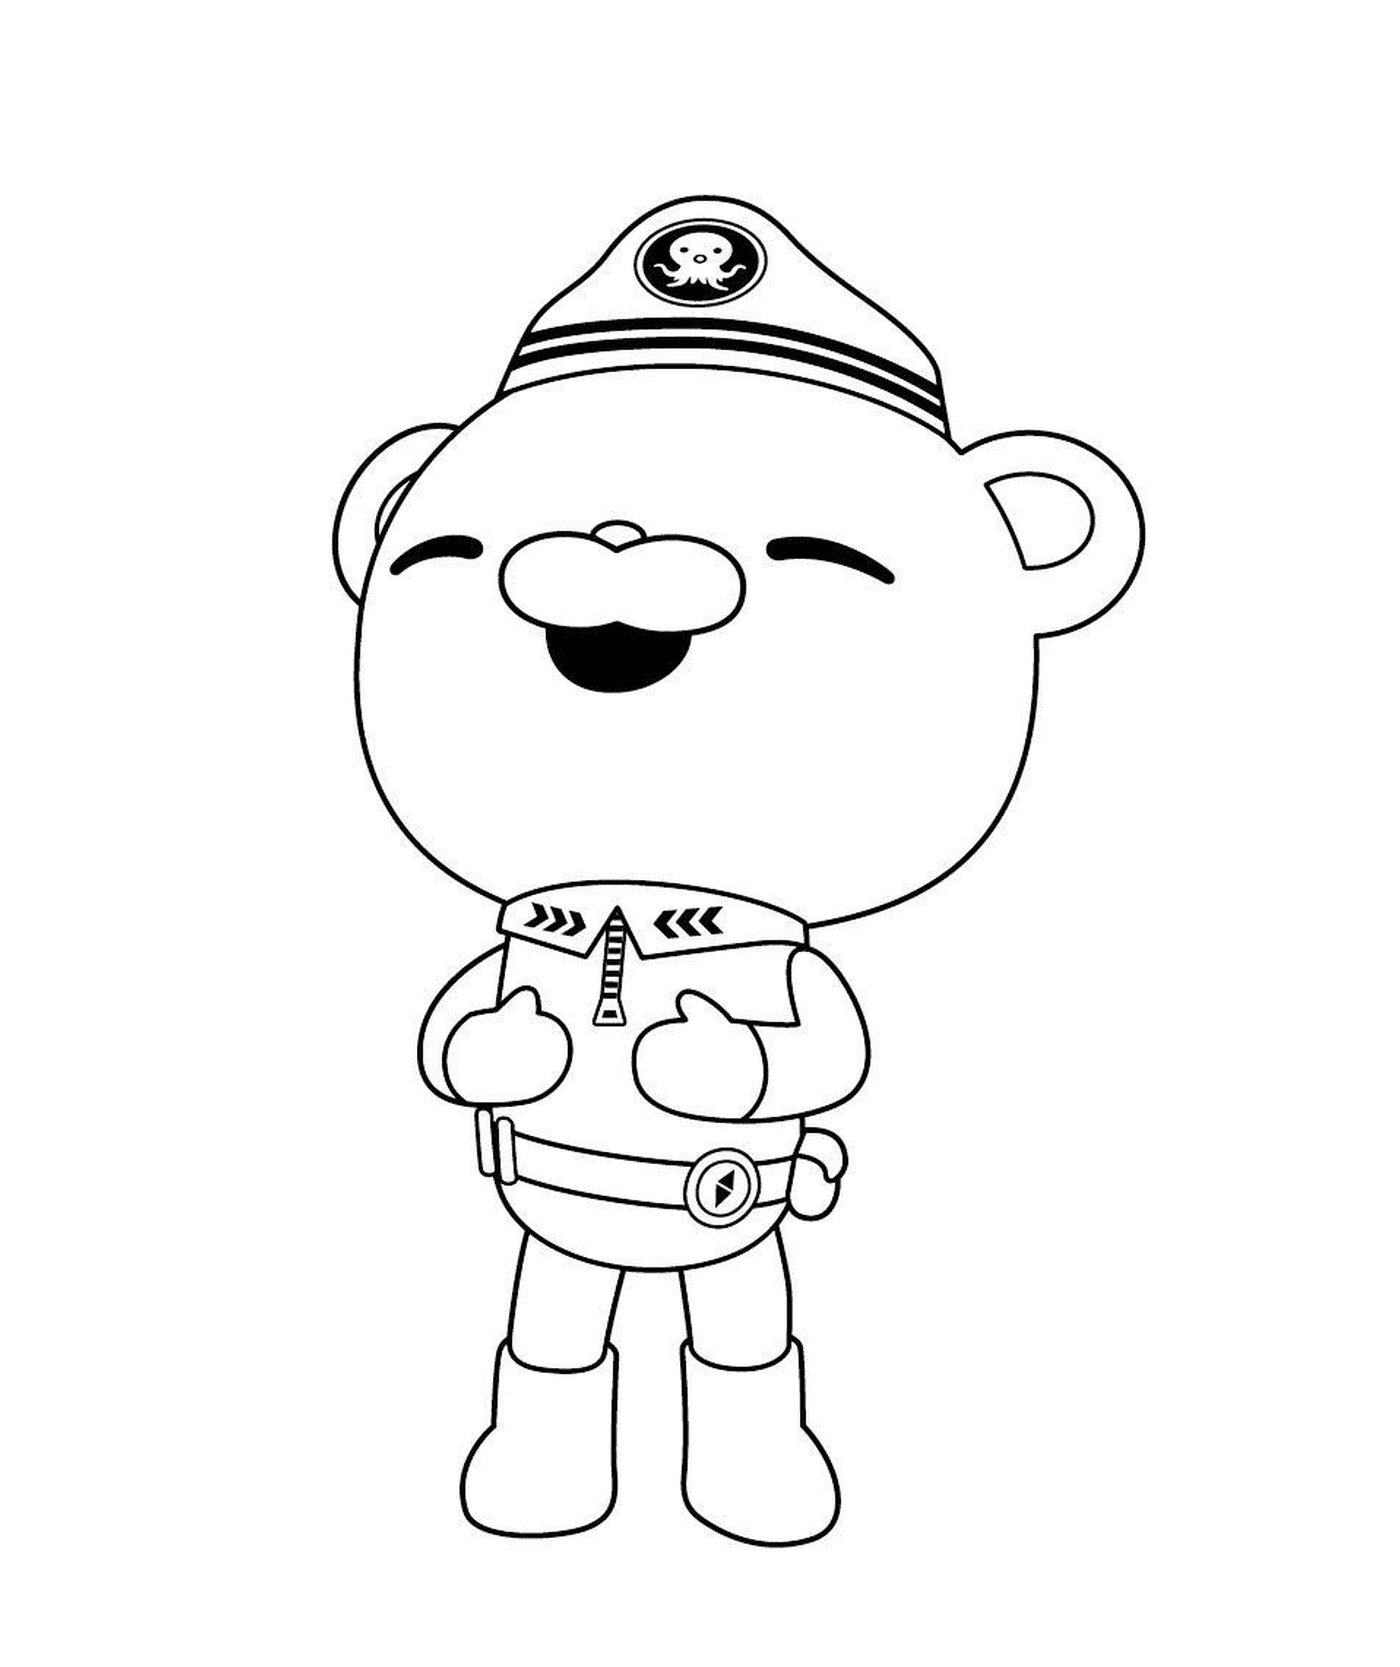  Captain Barnacles of the octanauts, a bear in his uniform 